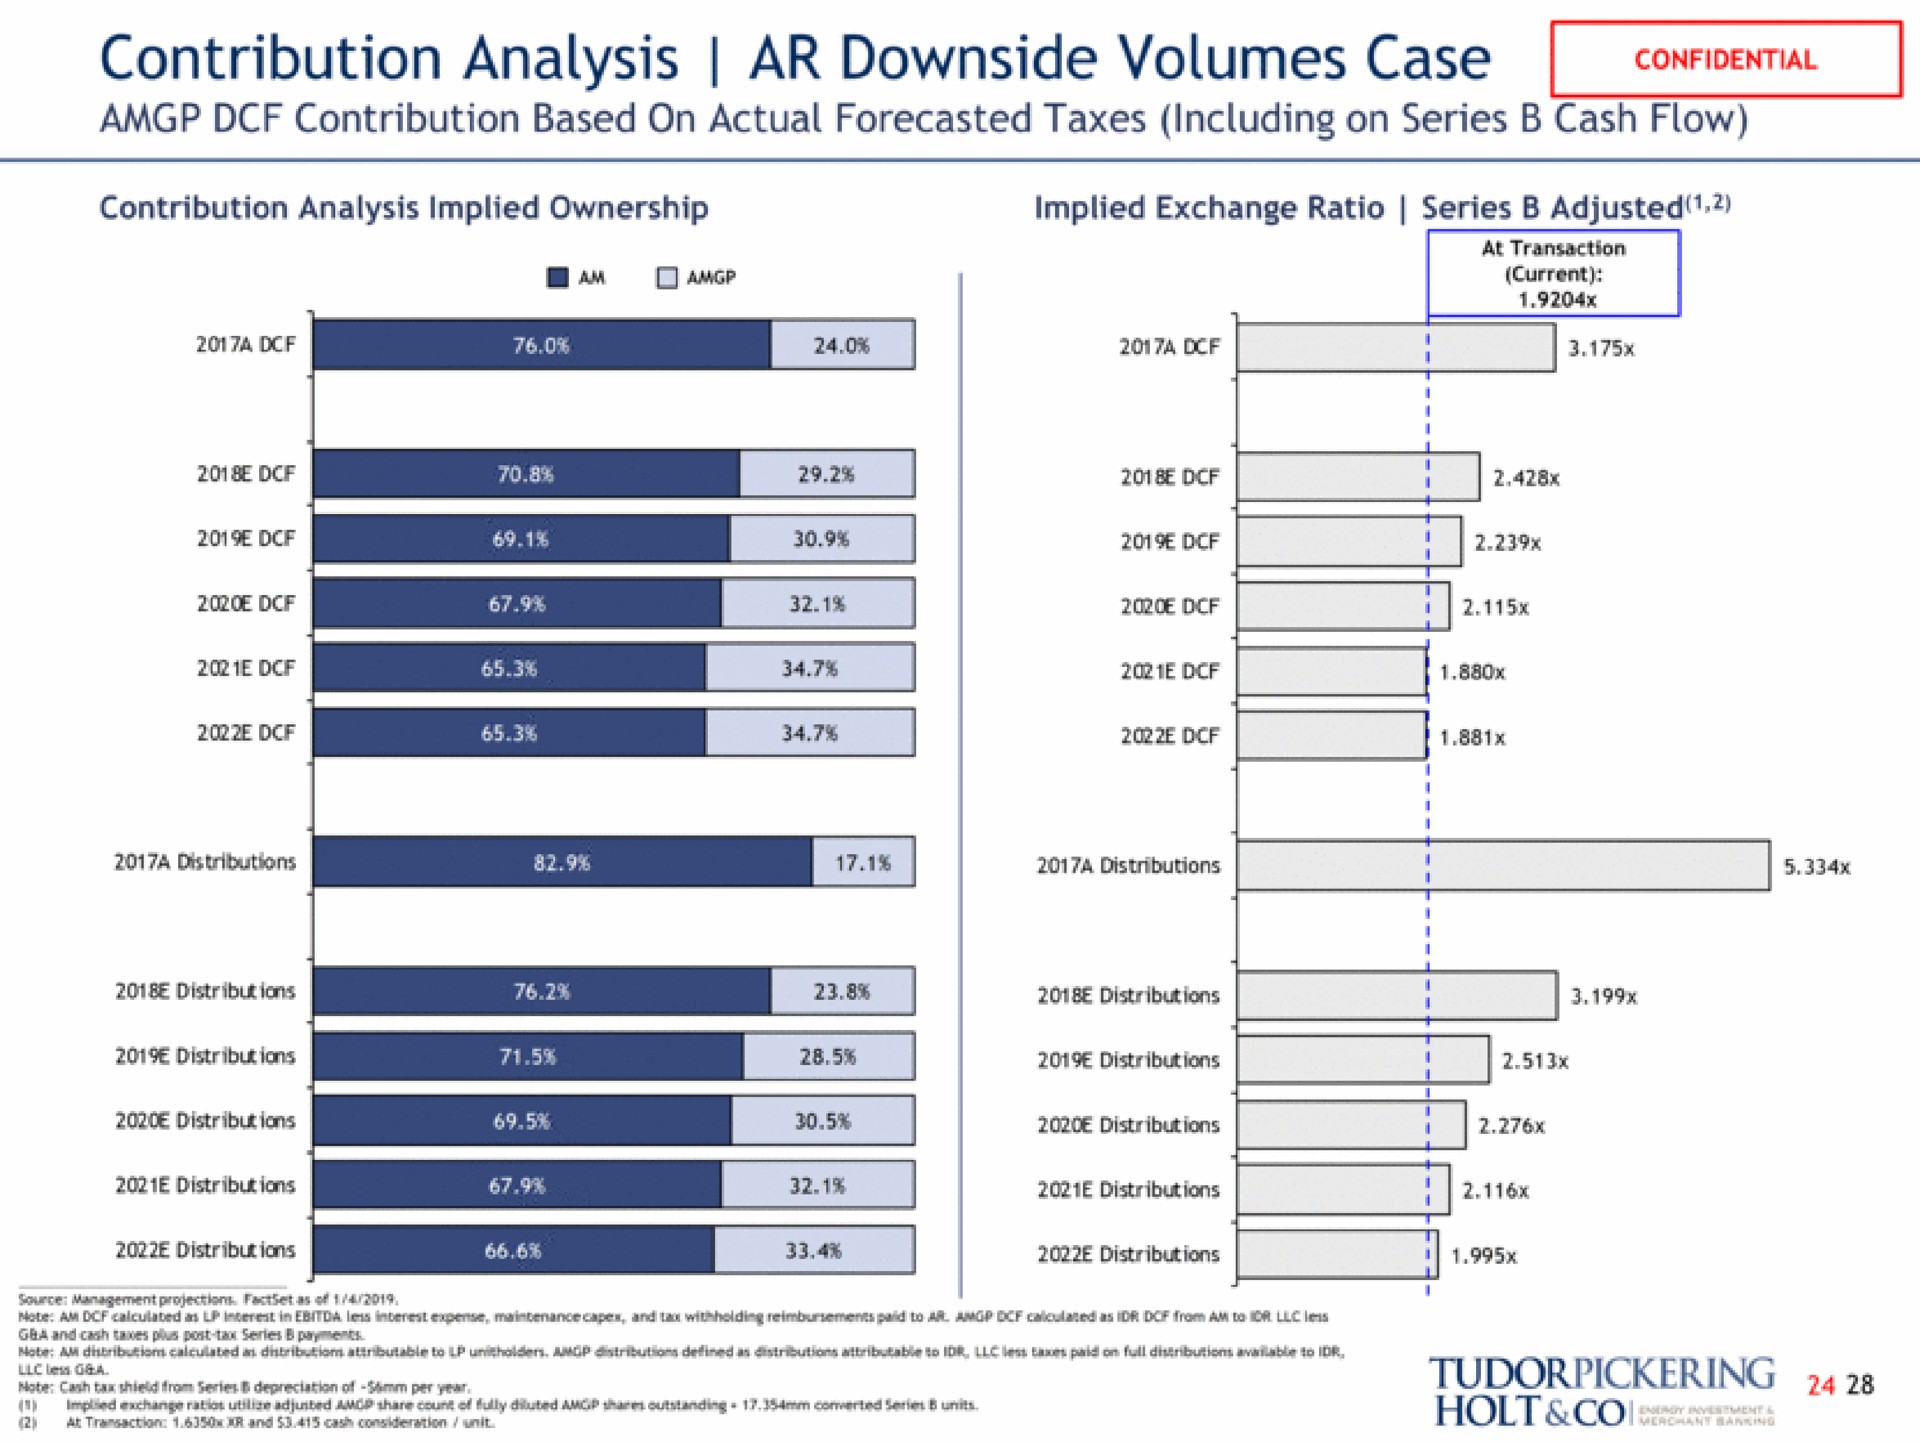 contribution analysis downside volumes case contribution based on actual forecasted taxes including on series cash flow distributions distributions distributions distributions | Tudor, Pickering, Holt & Co